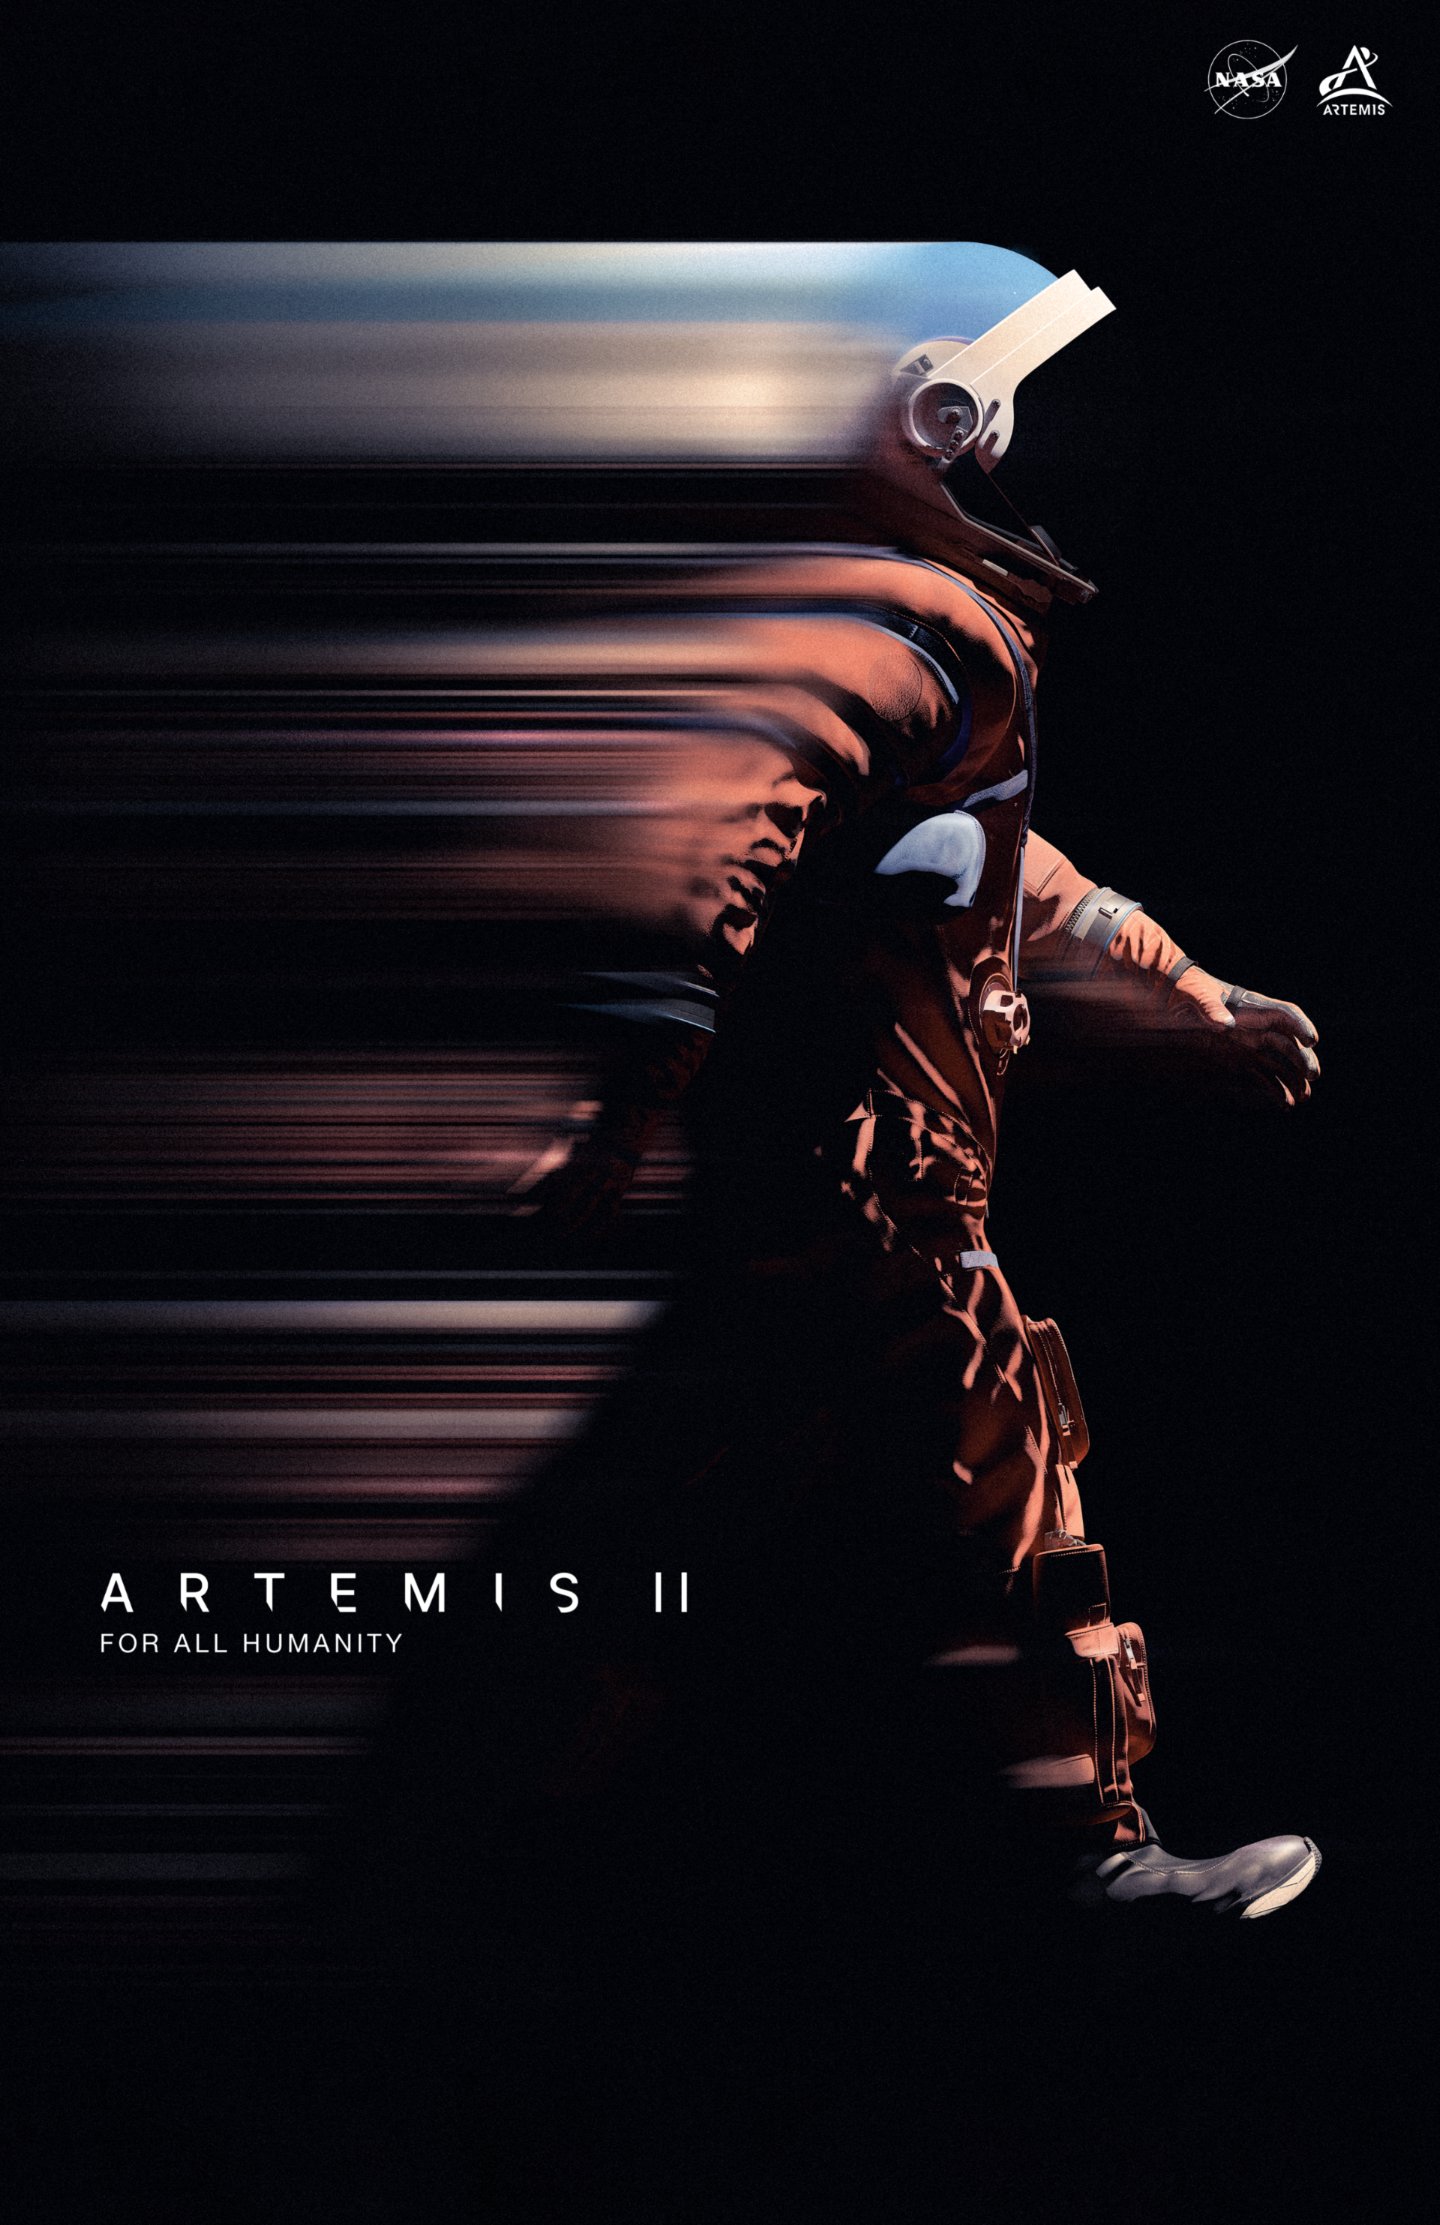 Stylized poster for NASA's Artemis II mission. The poster shows an astronaut walking against a black background. In the bottom left corner, it reads "Artemis II For All Humanity".